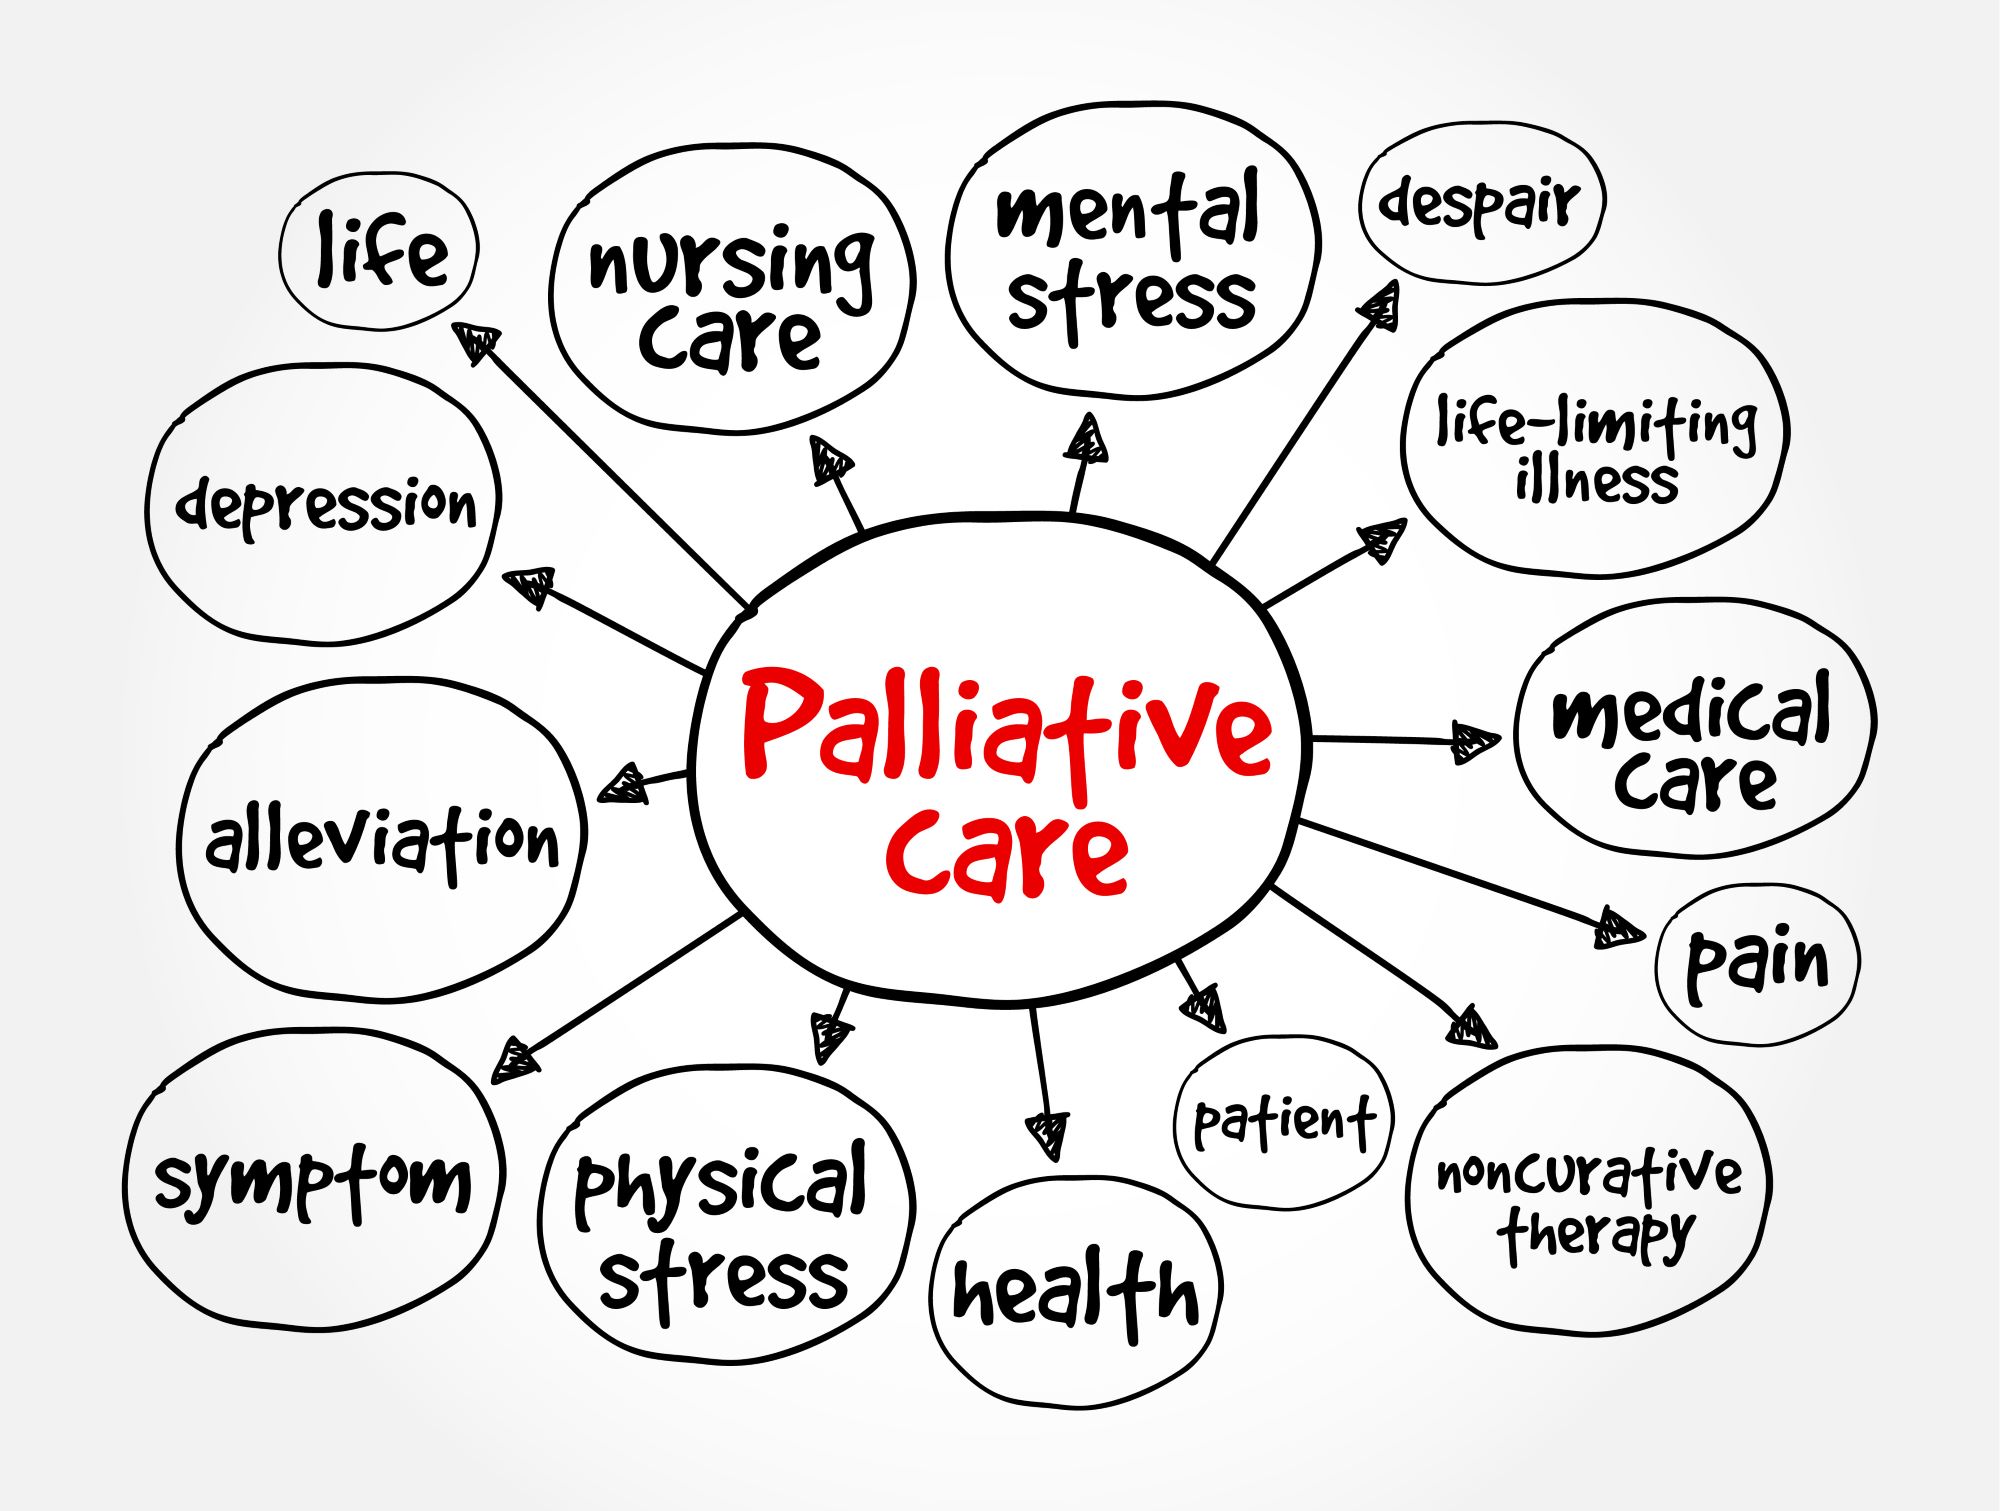 Creating Comfort Through Communication: Strategies for Supporting Mental Wellbeing in Palliative Care